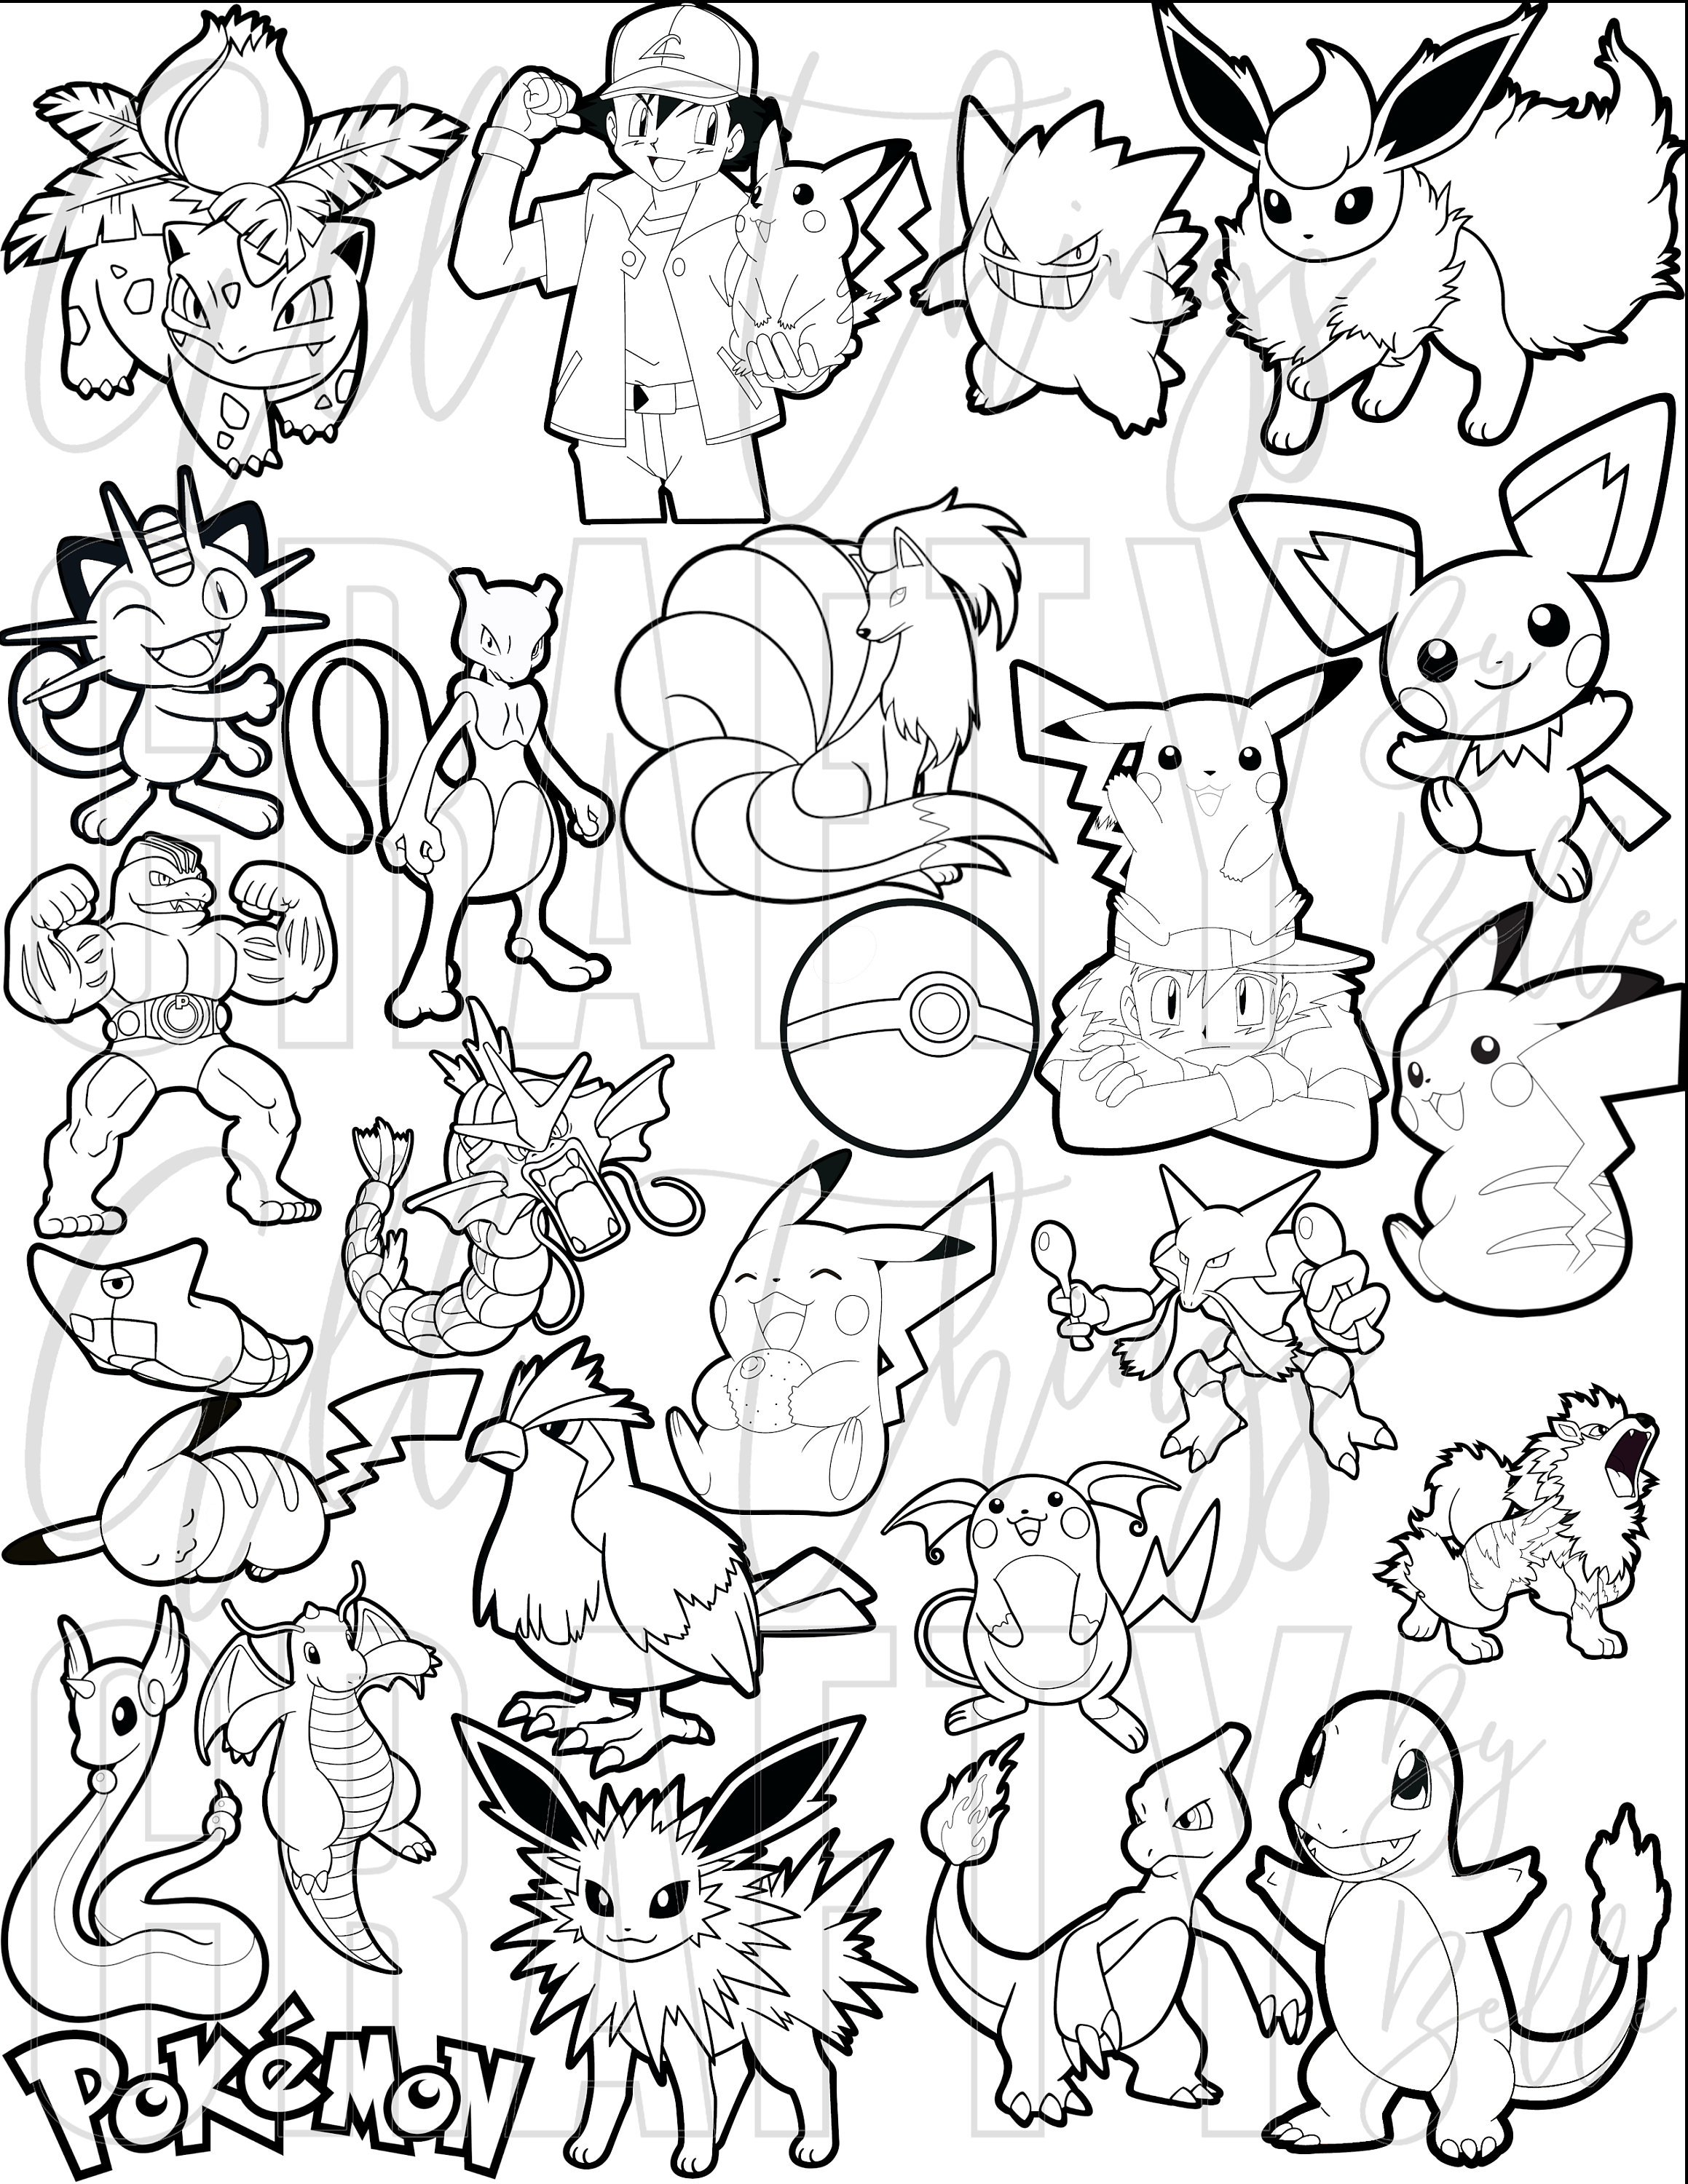 Pokemon Coloring Kit – From the thousands of images online concerning pokemon  coloring kit …